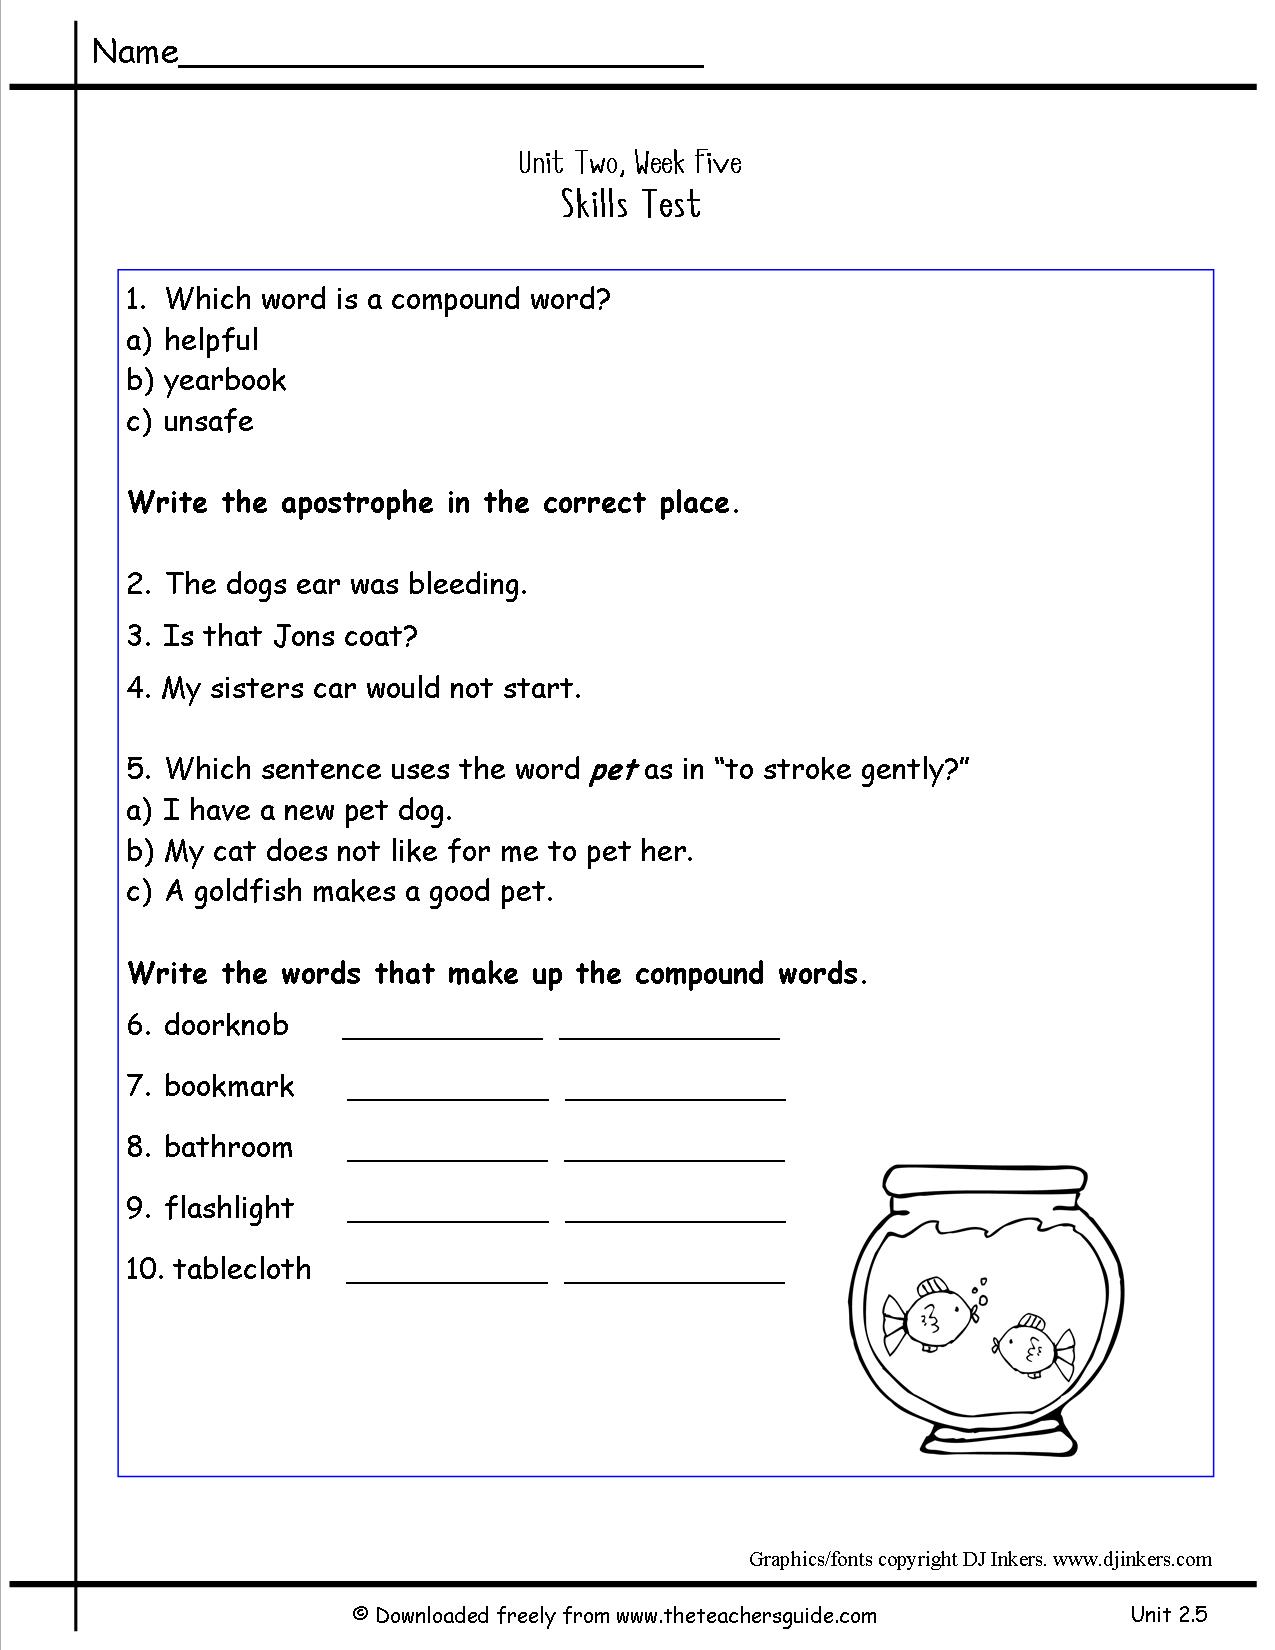 6-best-images-of-preschool-printable-worksheets-compound-word-cut-out-to-language-arts